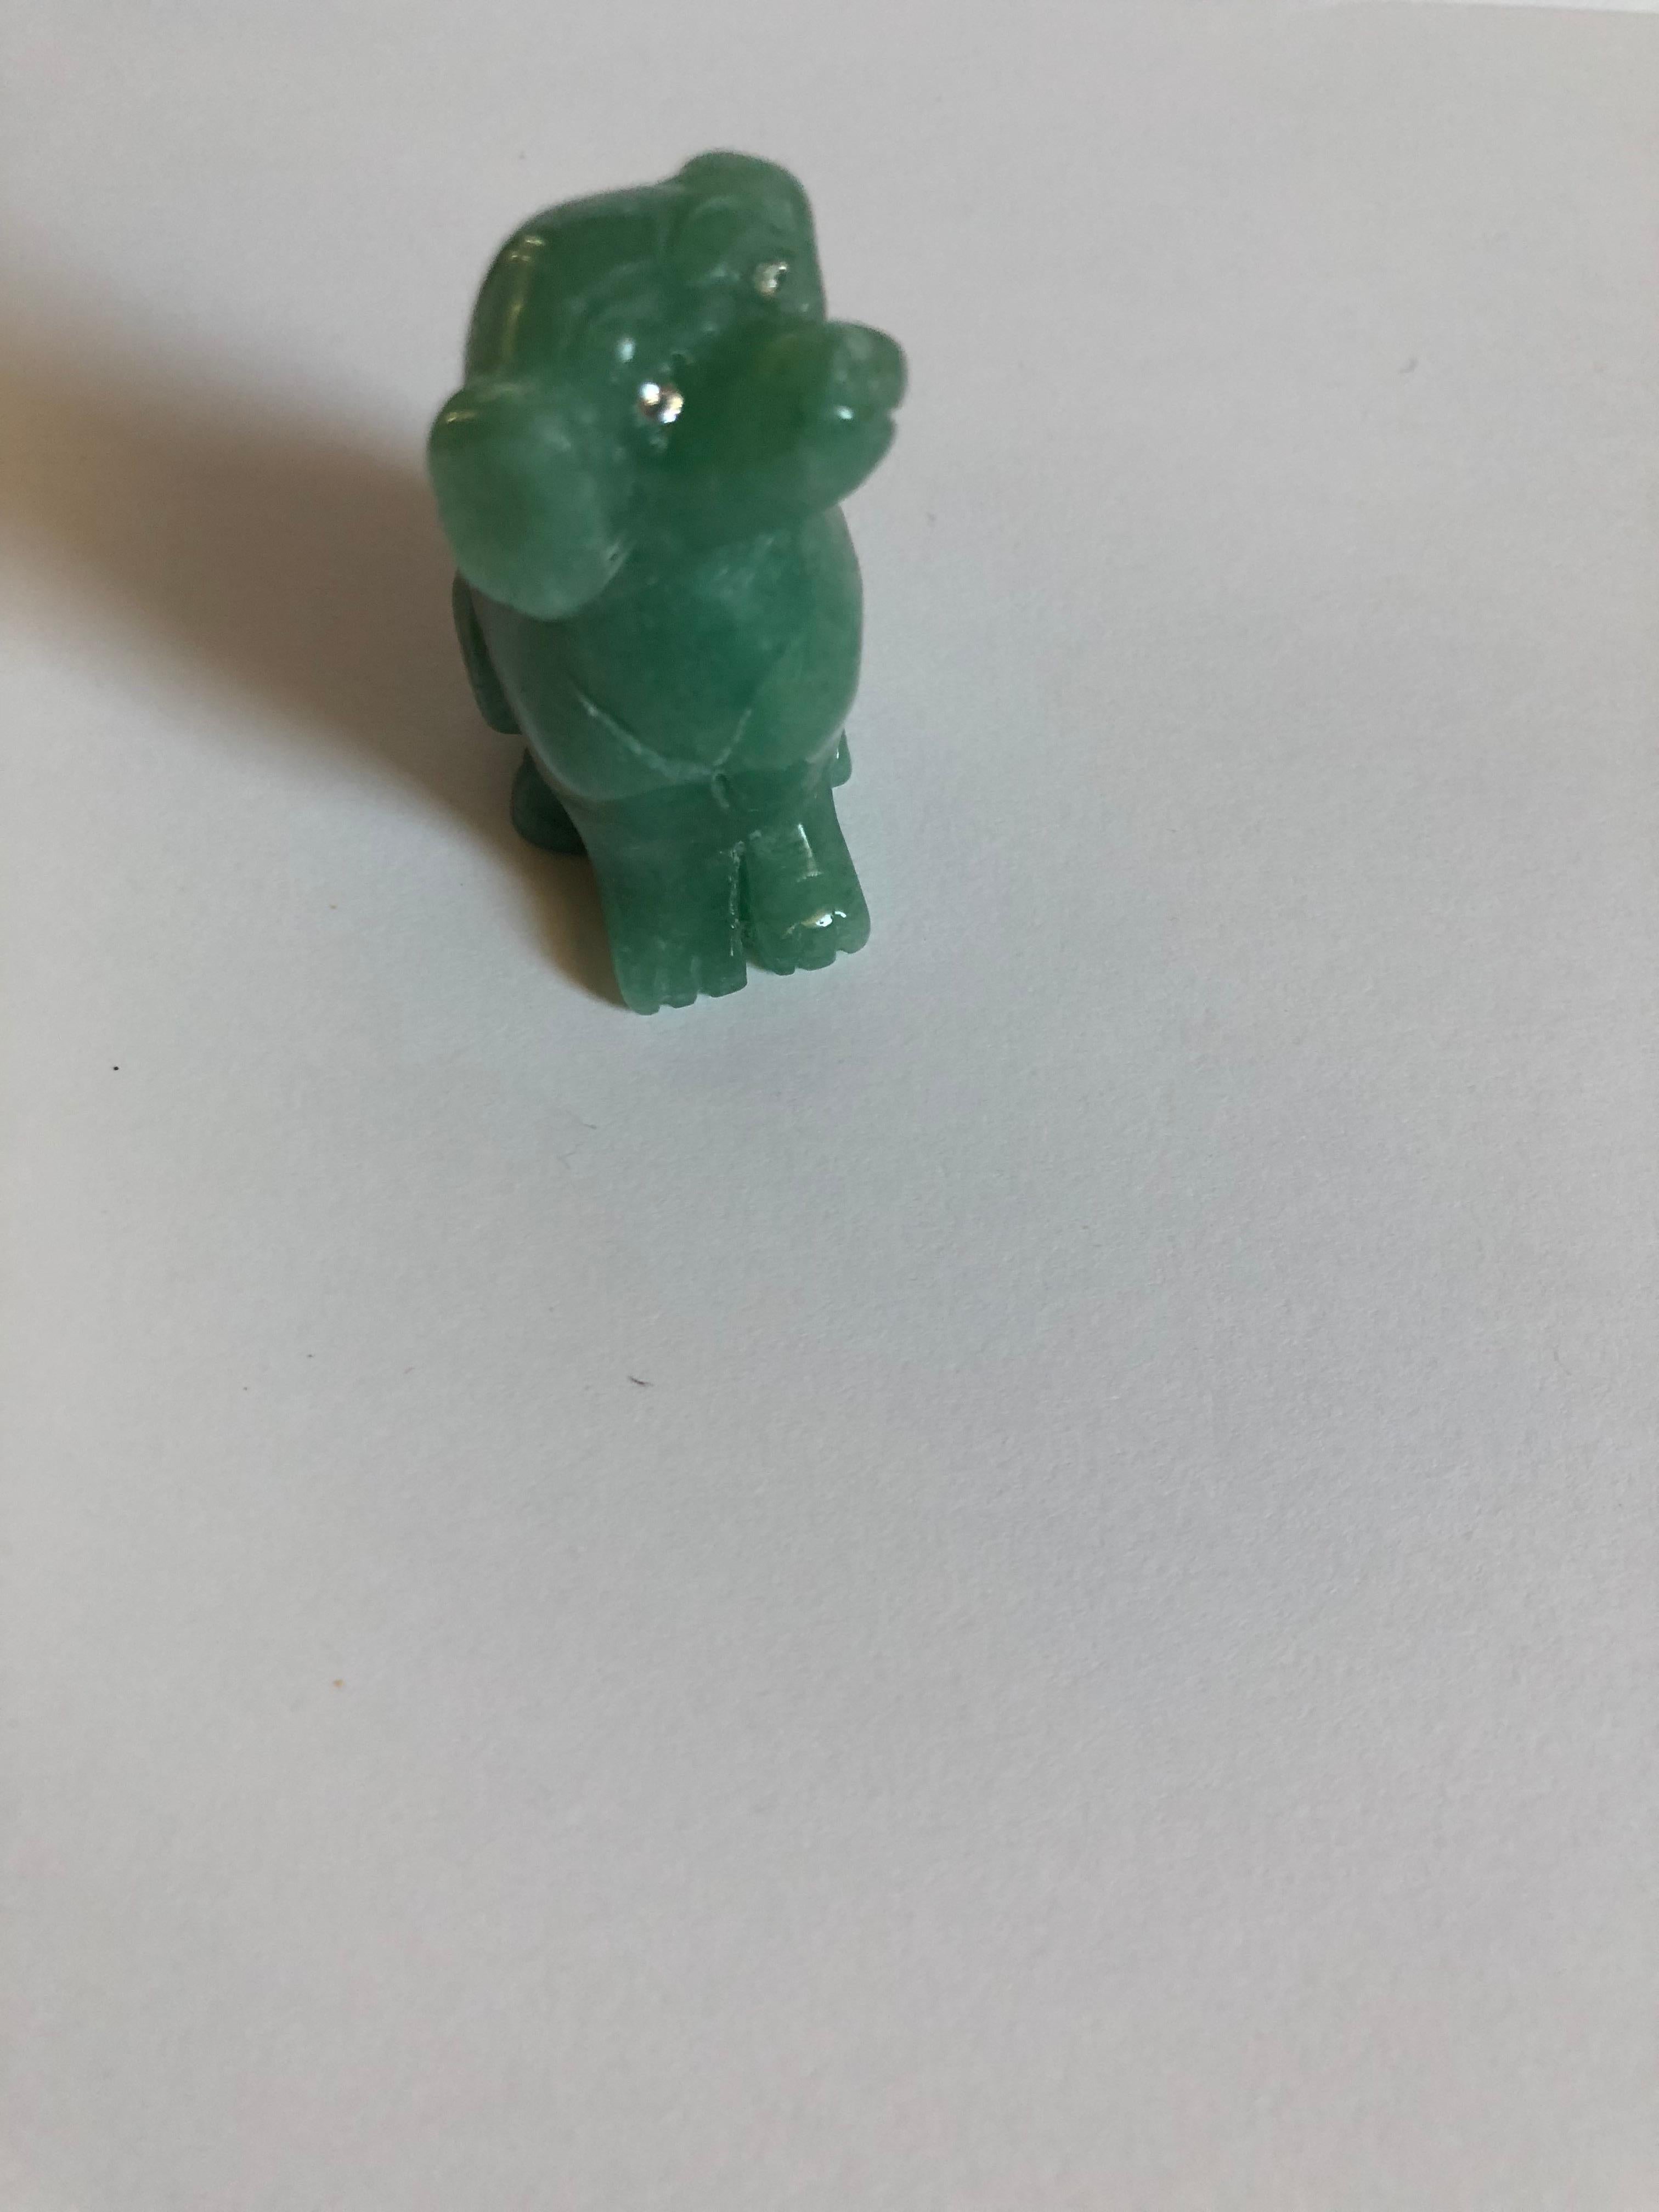 Faberge Antique Imperial Russian Dog Figure in Nephrite Stone with Diamond Eyes For Sale 5